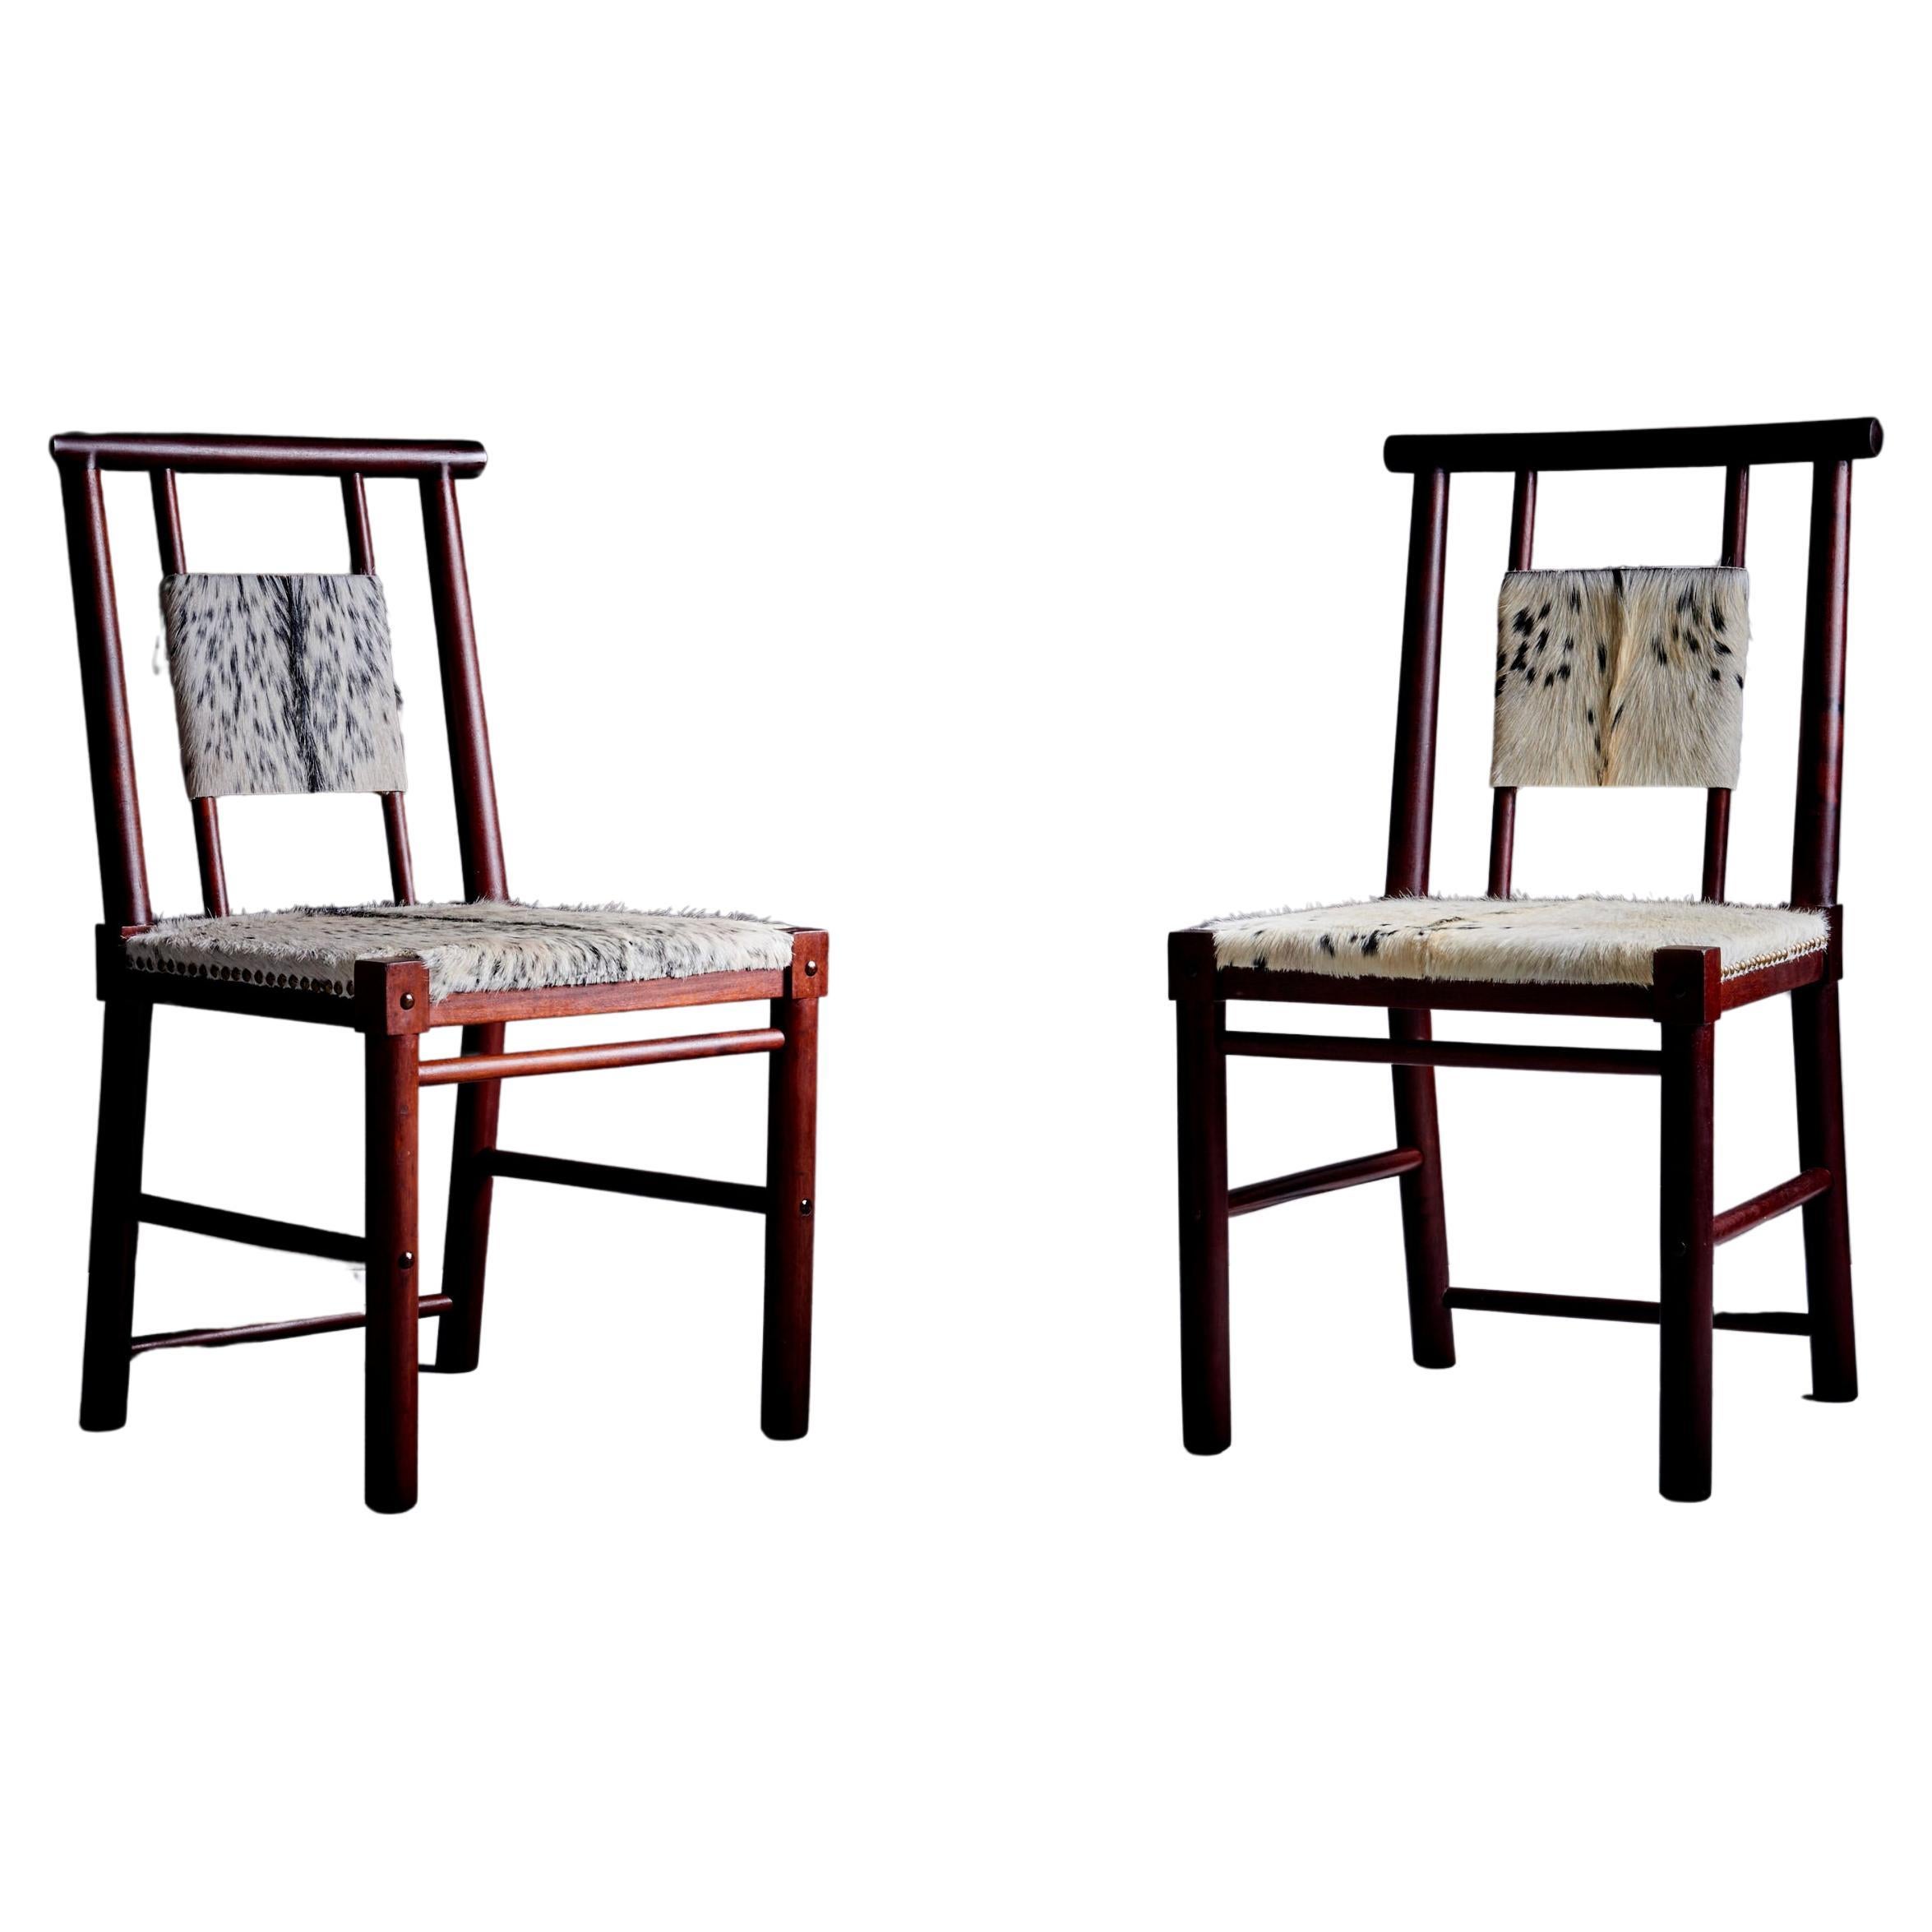 Pair of Dujo Chairs by Gonzalo Cordoba Cuba - 1950s For Sale